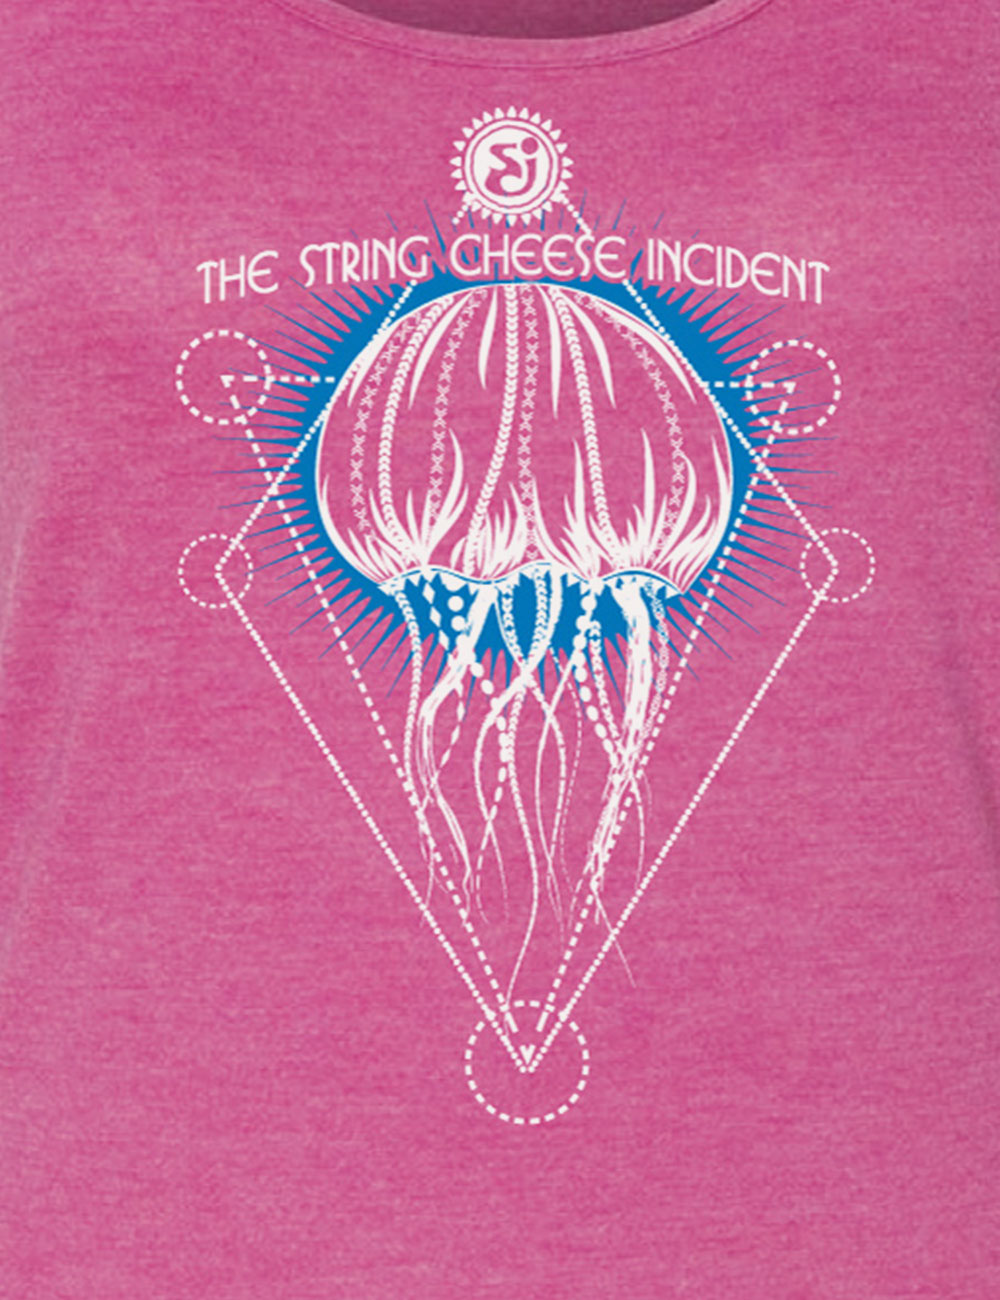 The String Cheese Incident - tanktop - Women - Geo Jelly Raspberry Closeup Detail